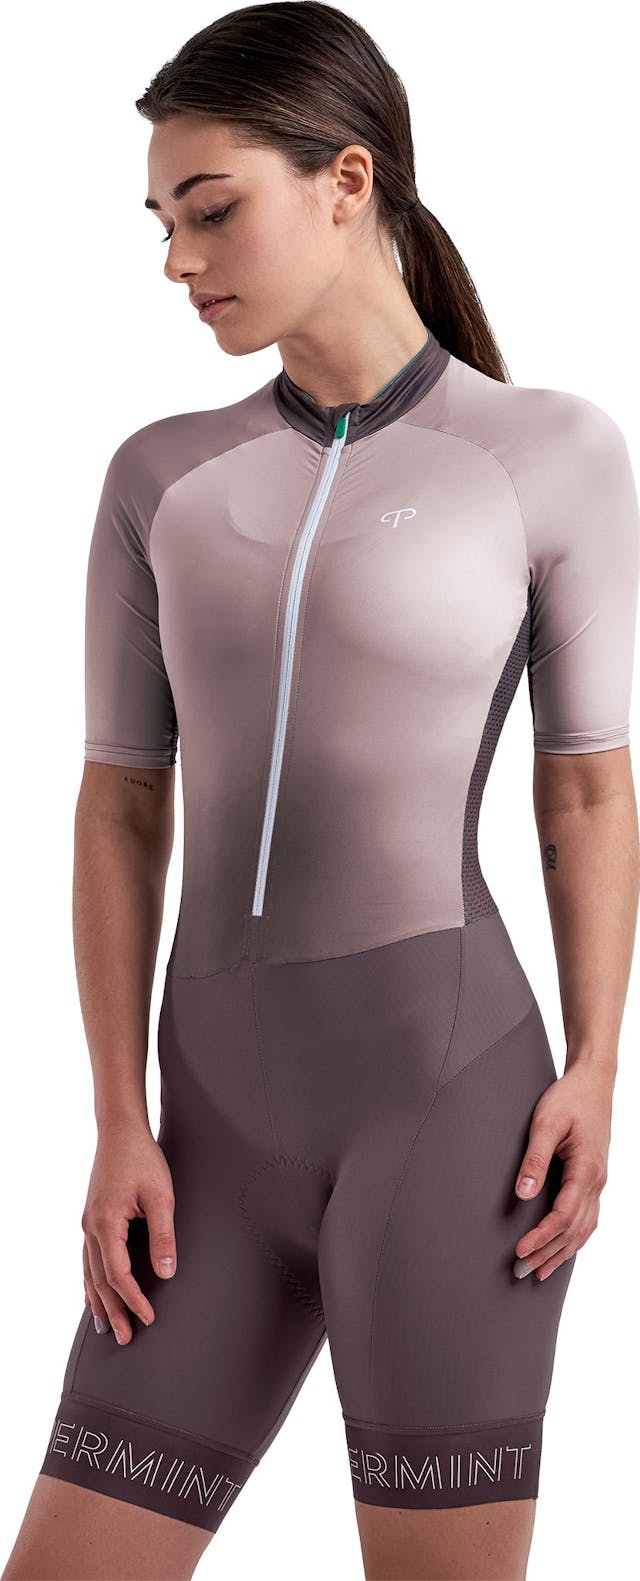 Product image for Courage Short Sleeve Skinsuit - Women’s